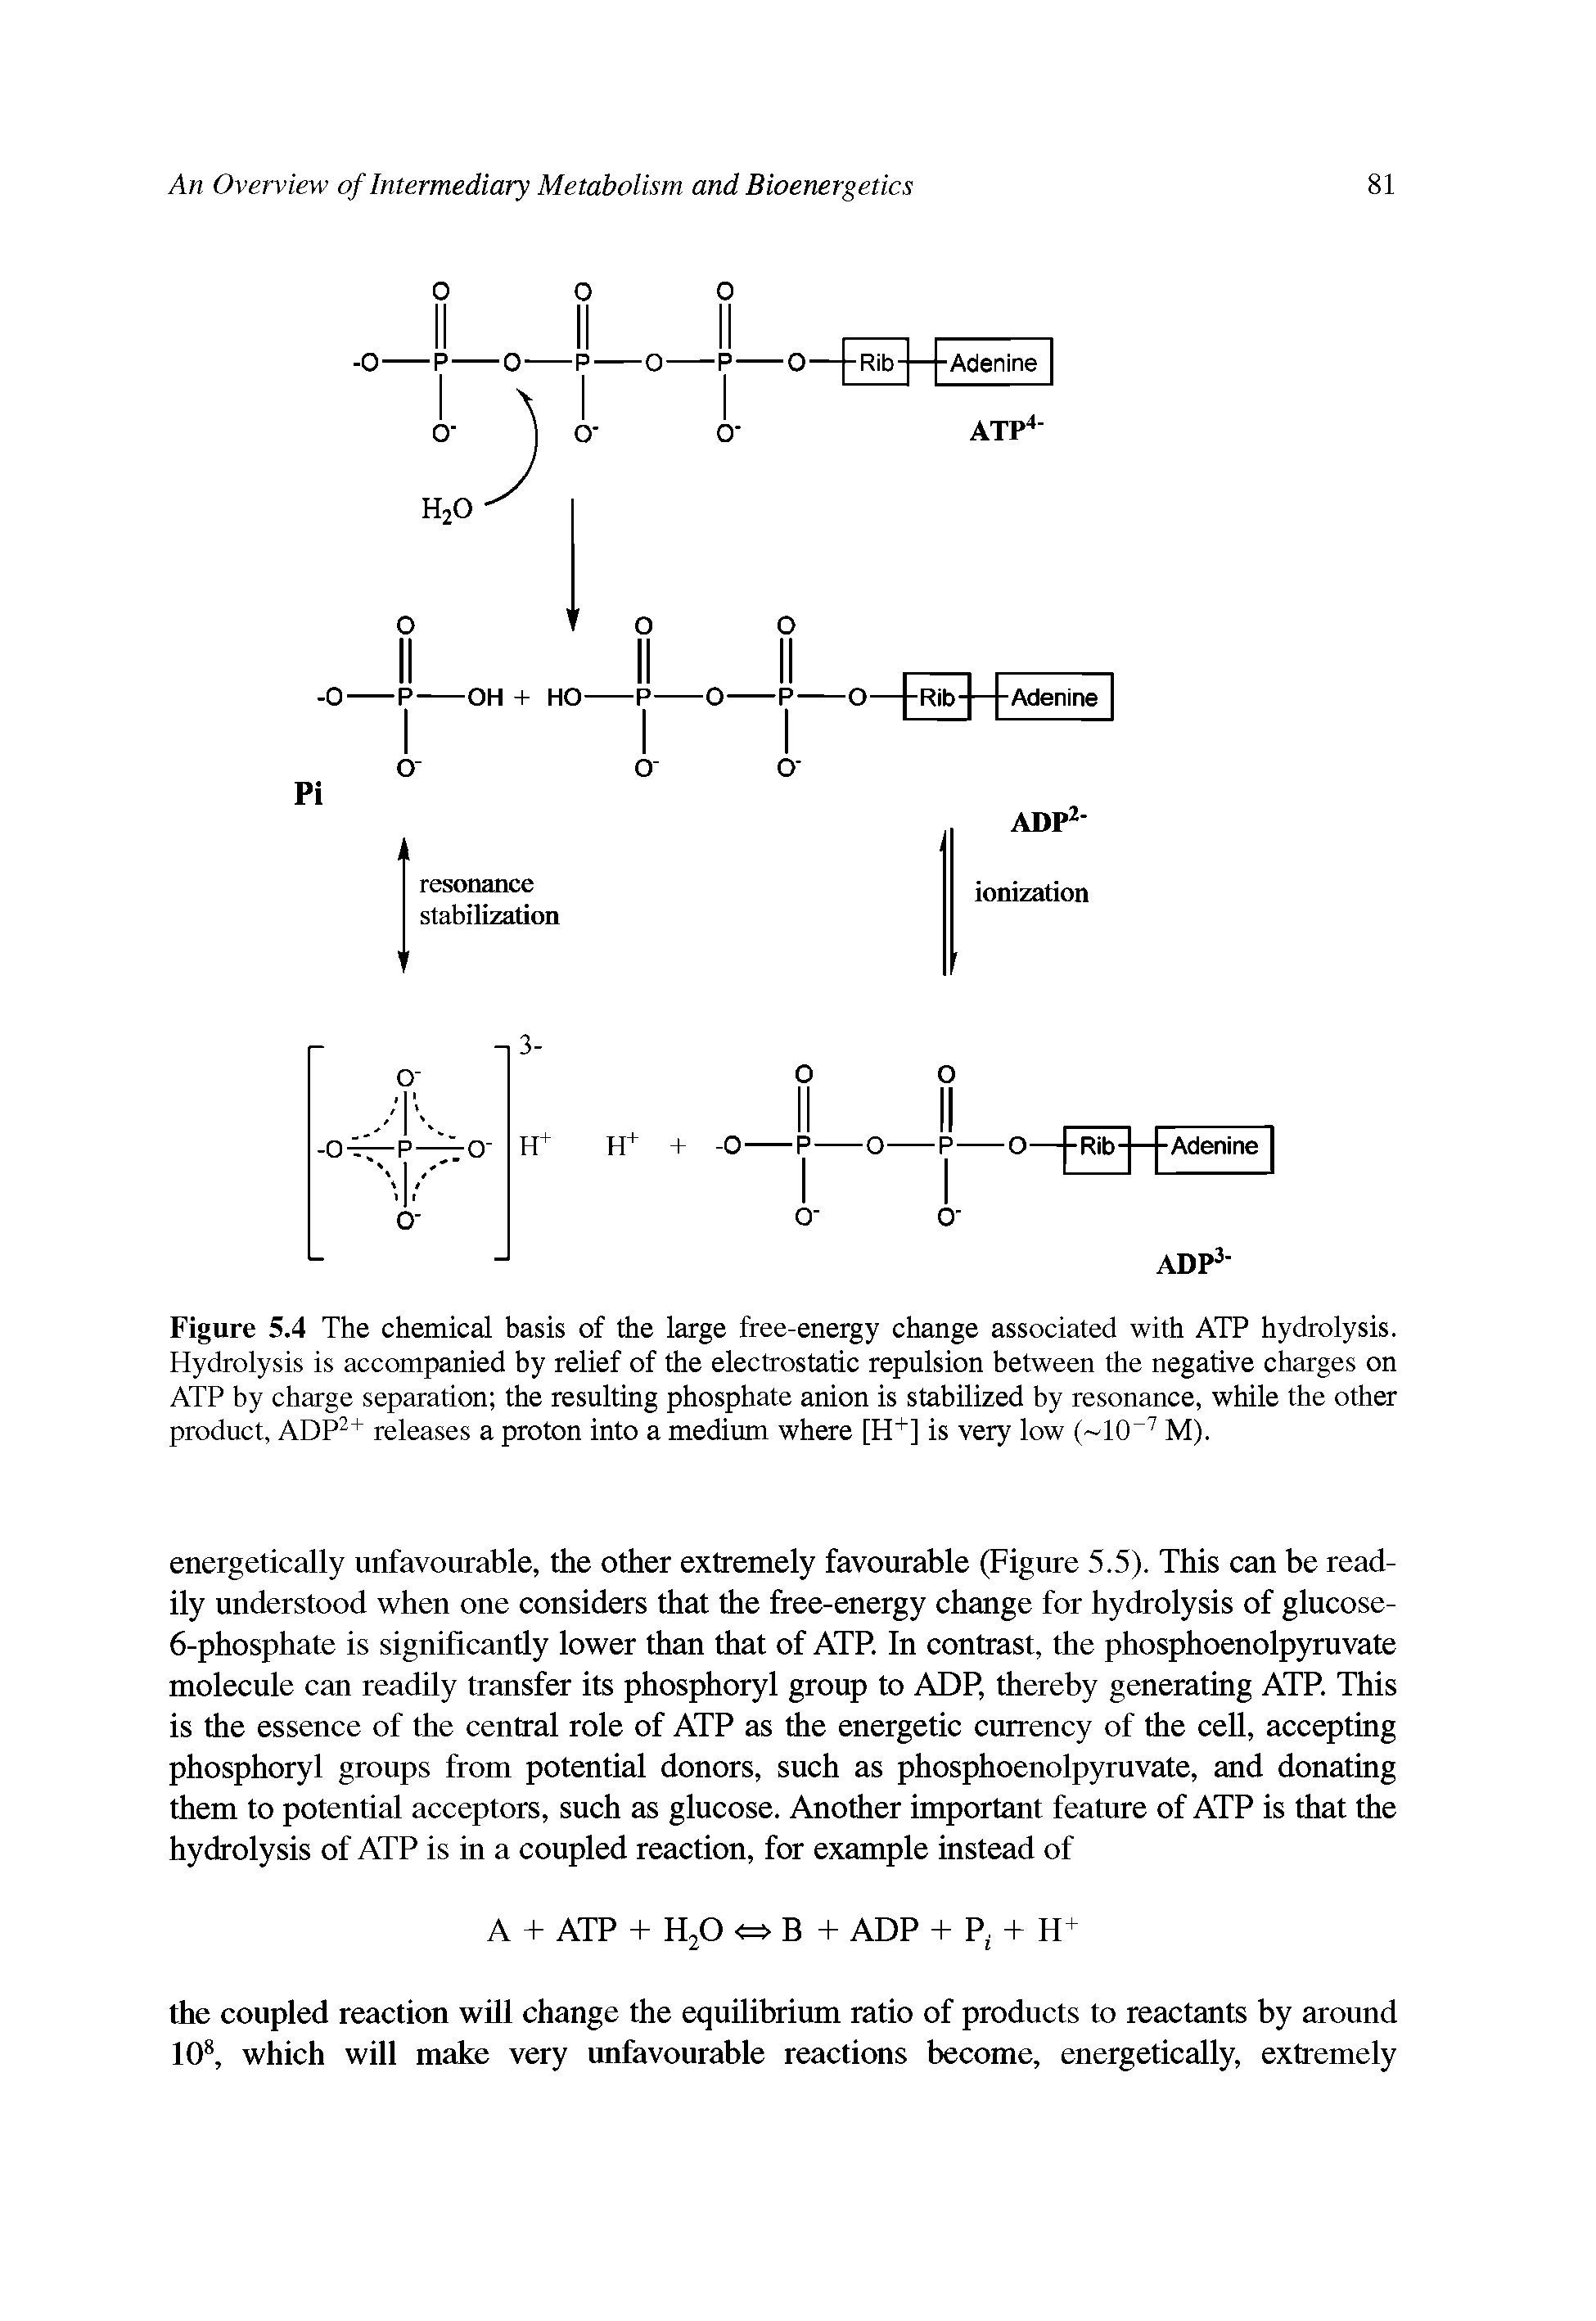 Figure 5.4 The chemical basis of the large free-energy change associated with ATP hydrolysis. Hydrolysis is accompanied by relief of the electrostatic repulsion between the negative charges on ATP by charge separation the resulting phosphate anion is stabilized by resonance, while the other product, ADP2+ releases a proton into a medium where [H+] is very low ( 10 7 M).